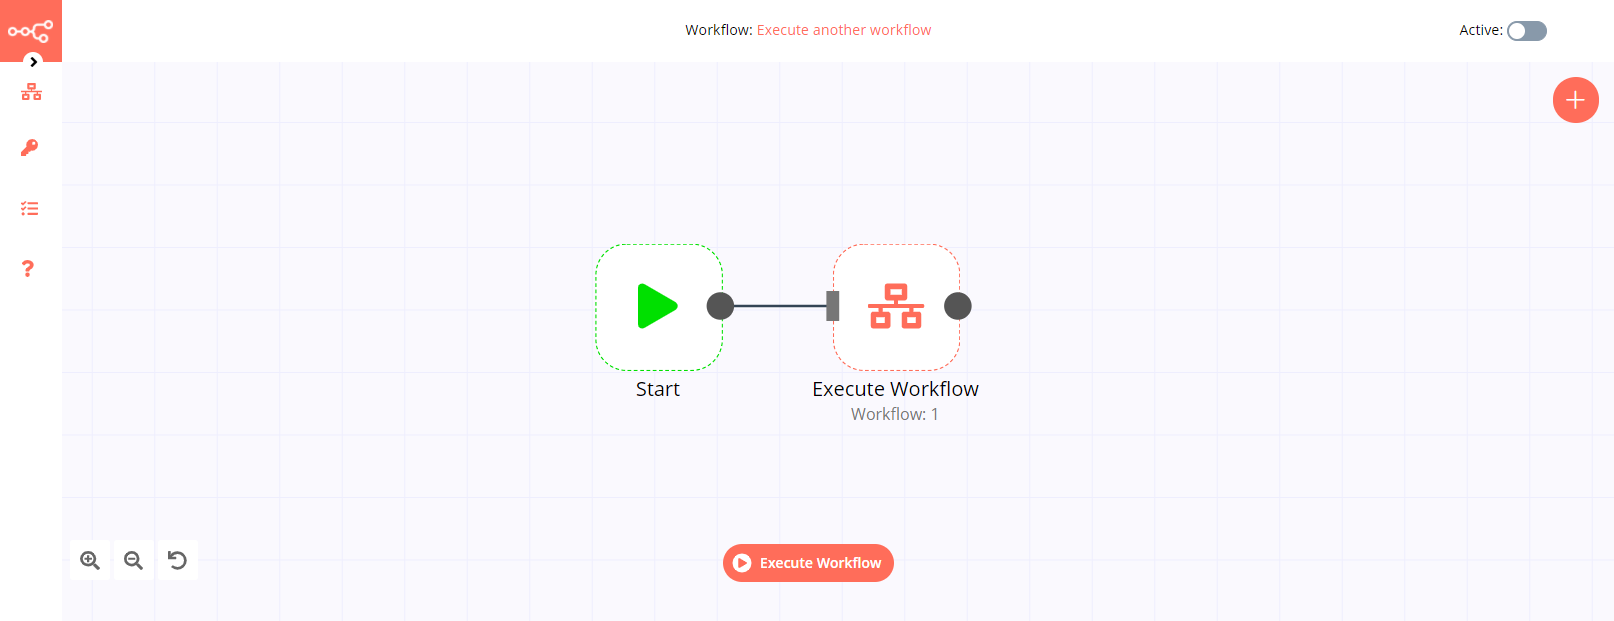 A workflow with the Execute Workflow node